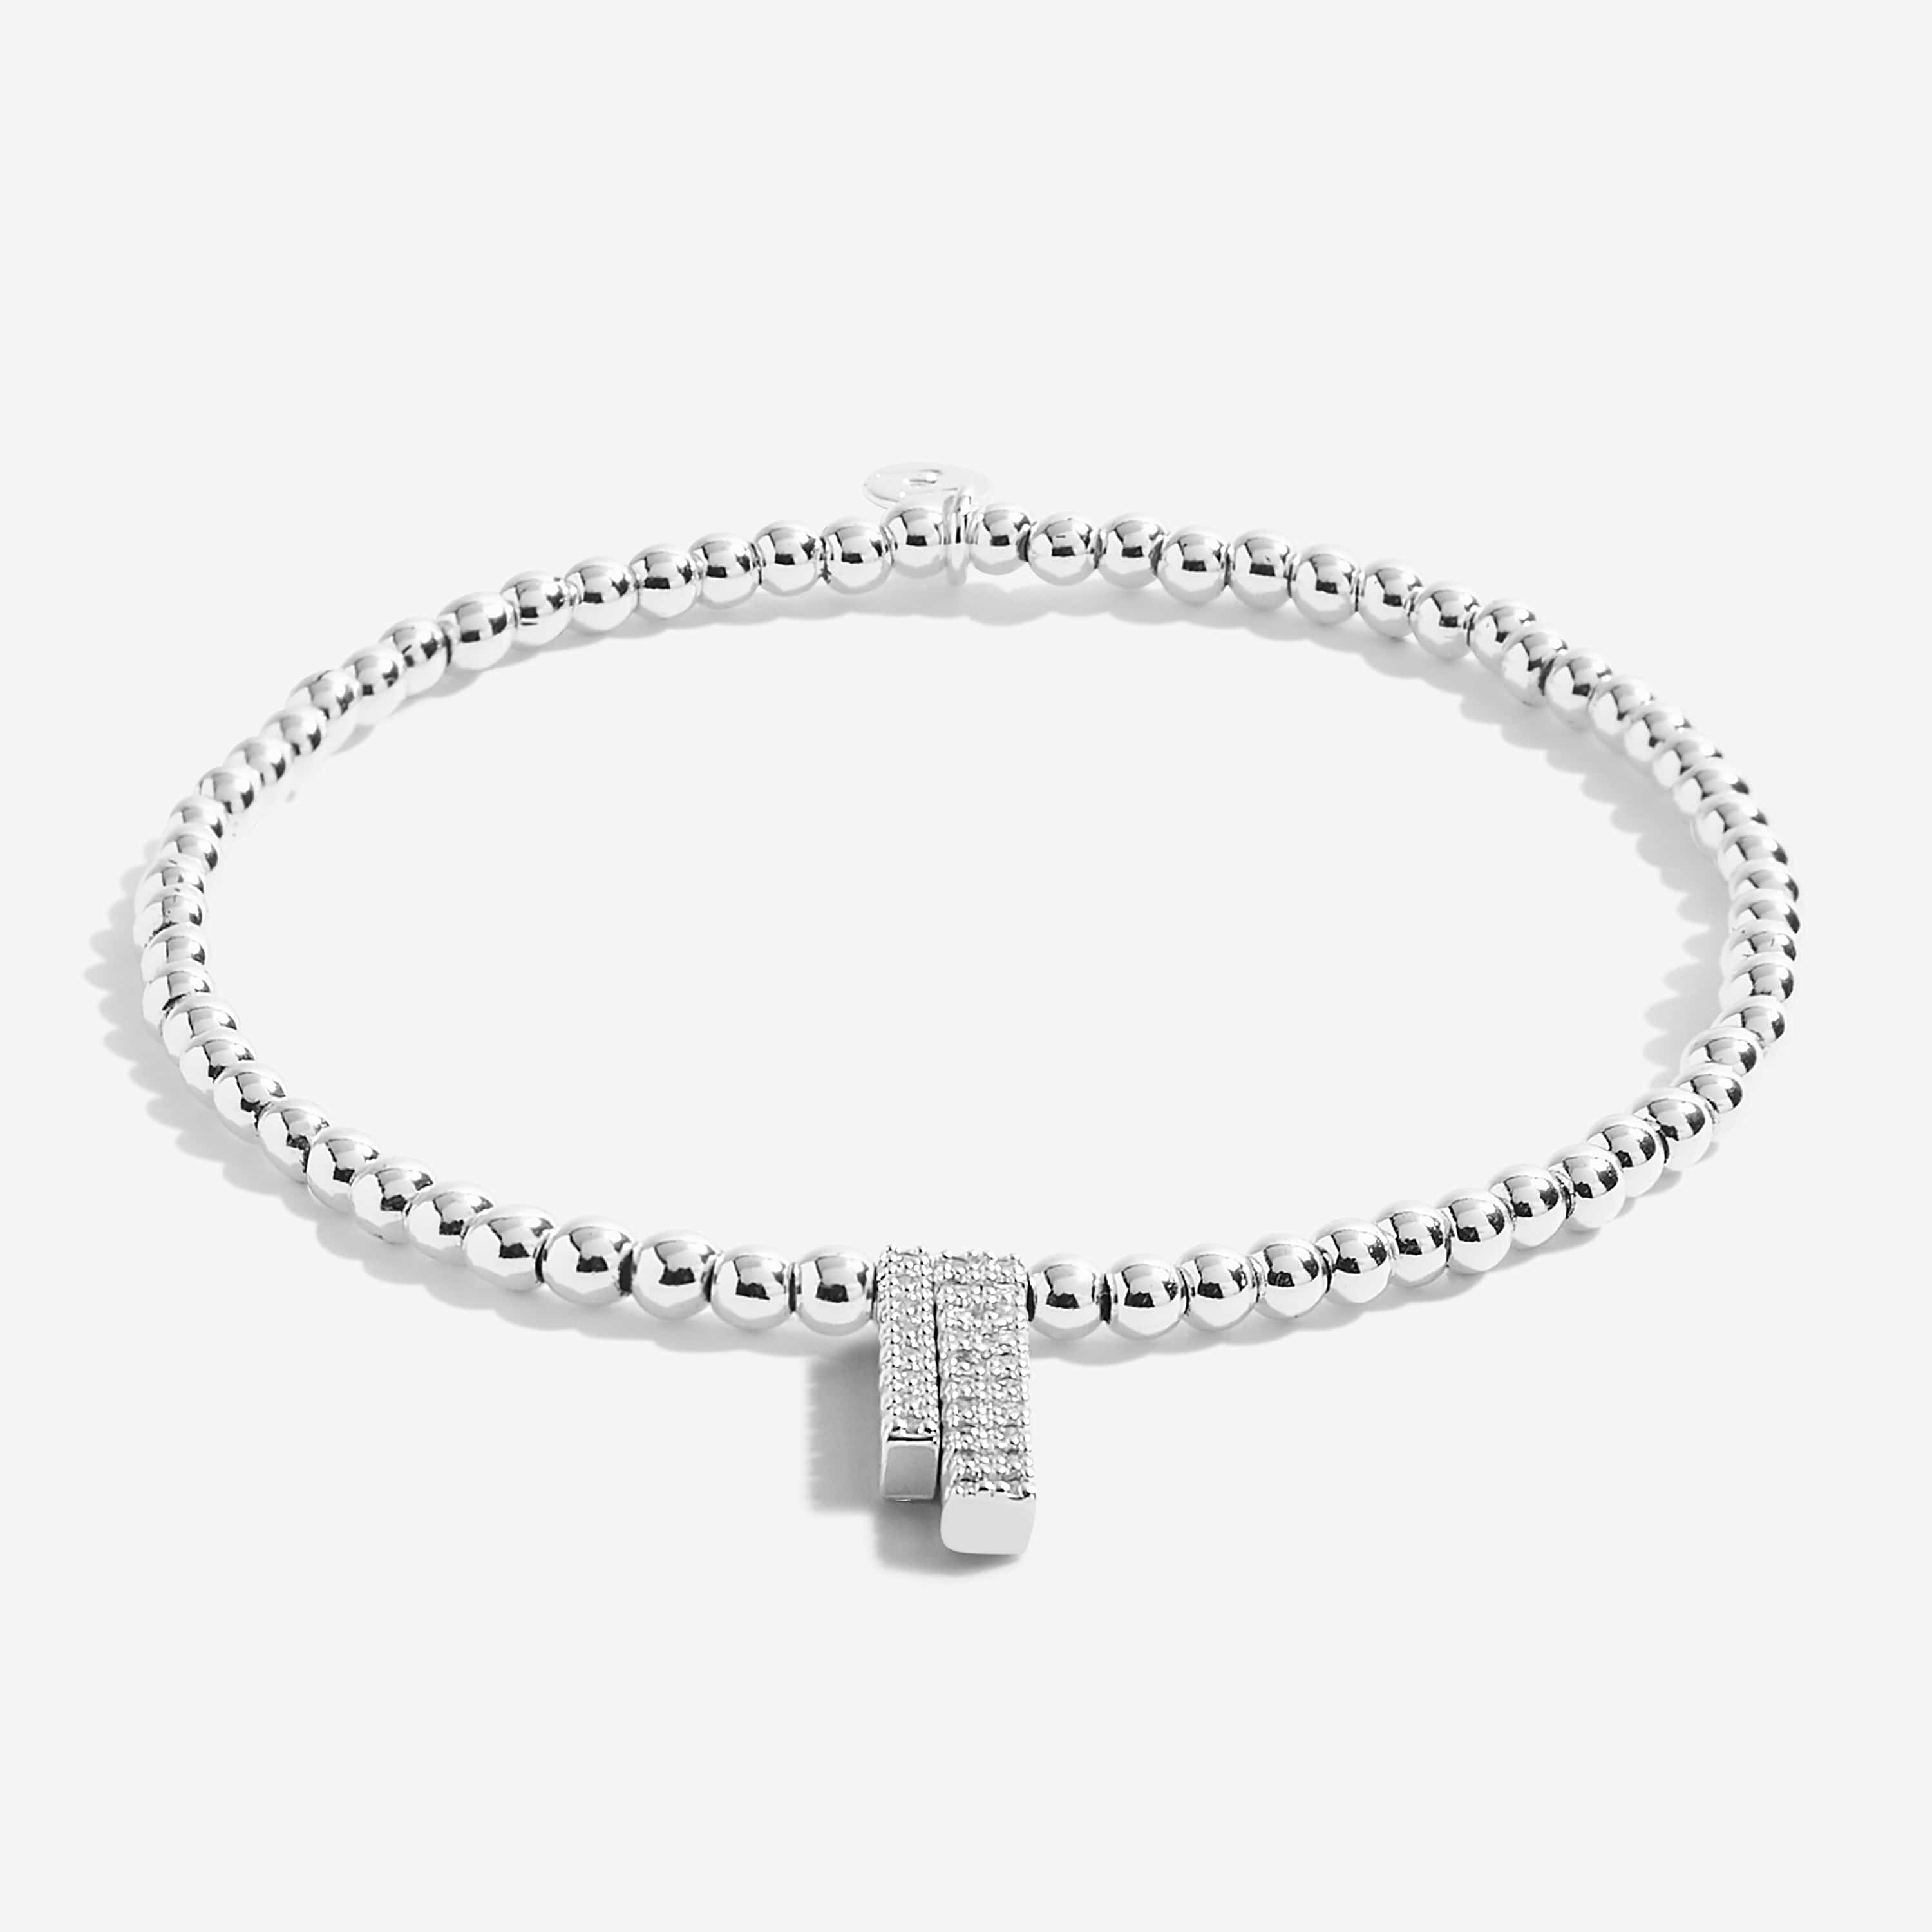 Joma Jewellery Bracelet Joma Jewellery Bracelet - A Little Through Thick and Thin